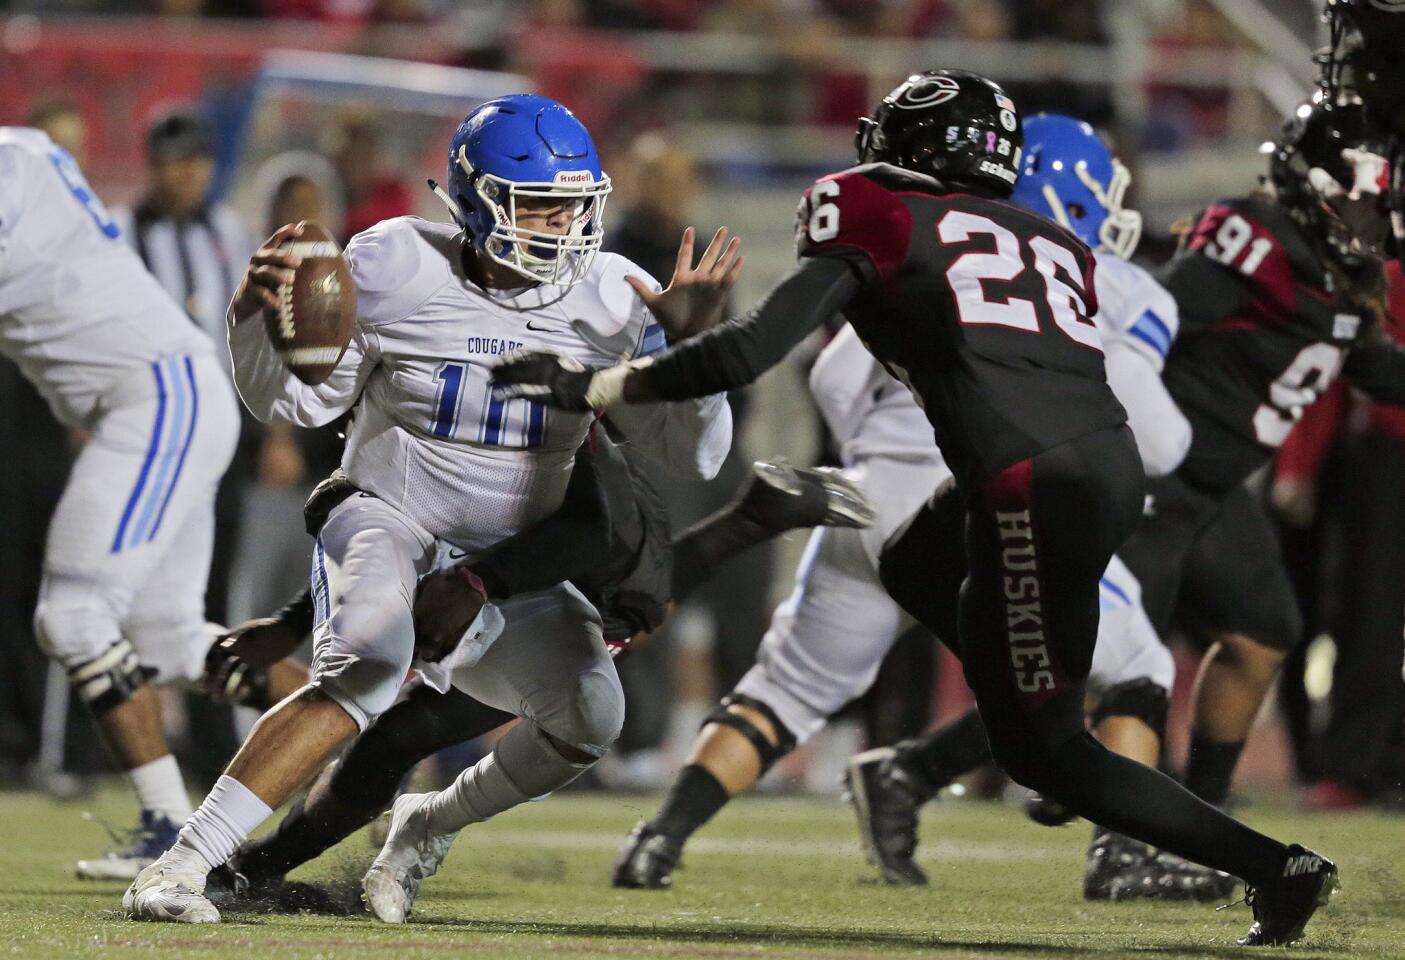 Norco quarterback Victor Viramontes (10) is sacked by Corona Centennial's Octavio Cortes (7) and Josh Wilson (23) during a game on Thursday night.